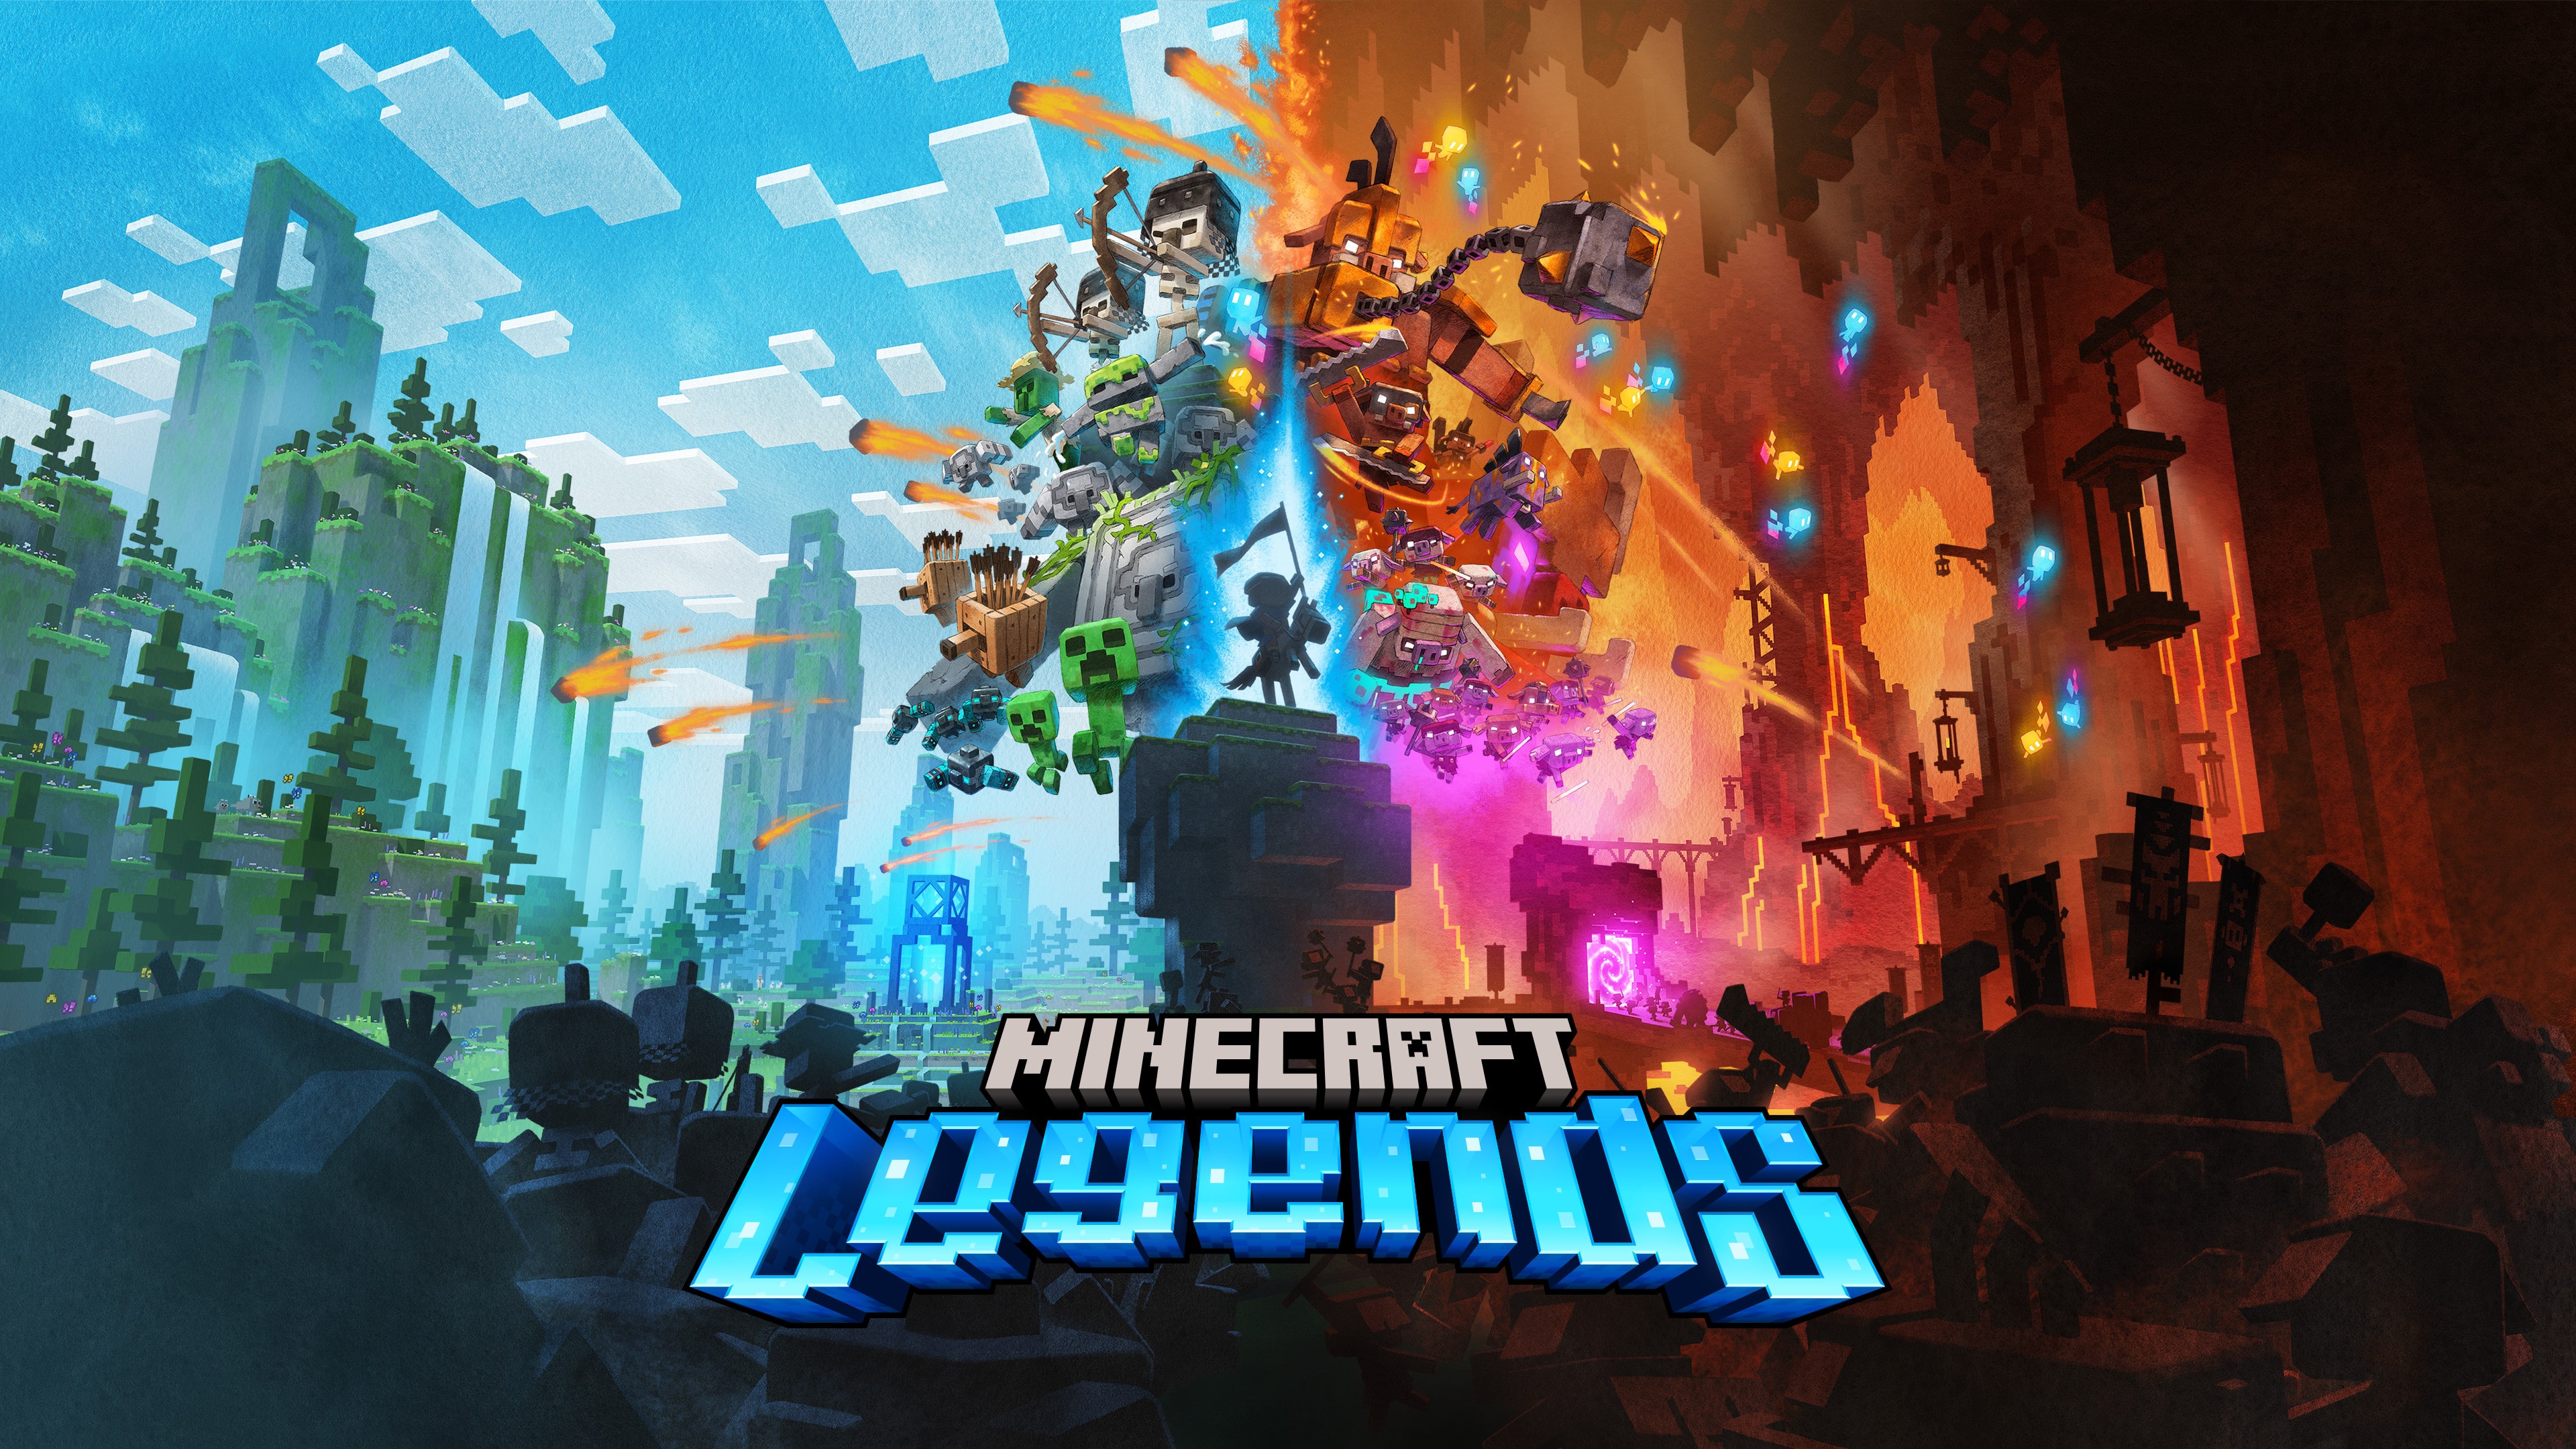 Minecraft Legends (Simplified Chinese, English, Korean, Japanese, Traditional Chinese)